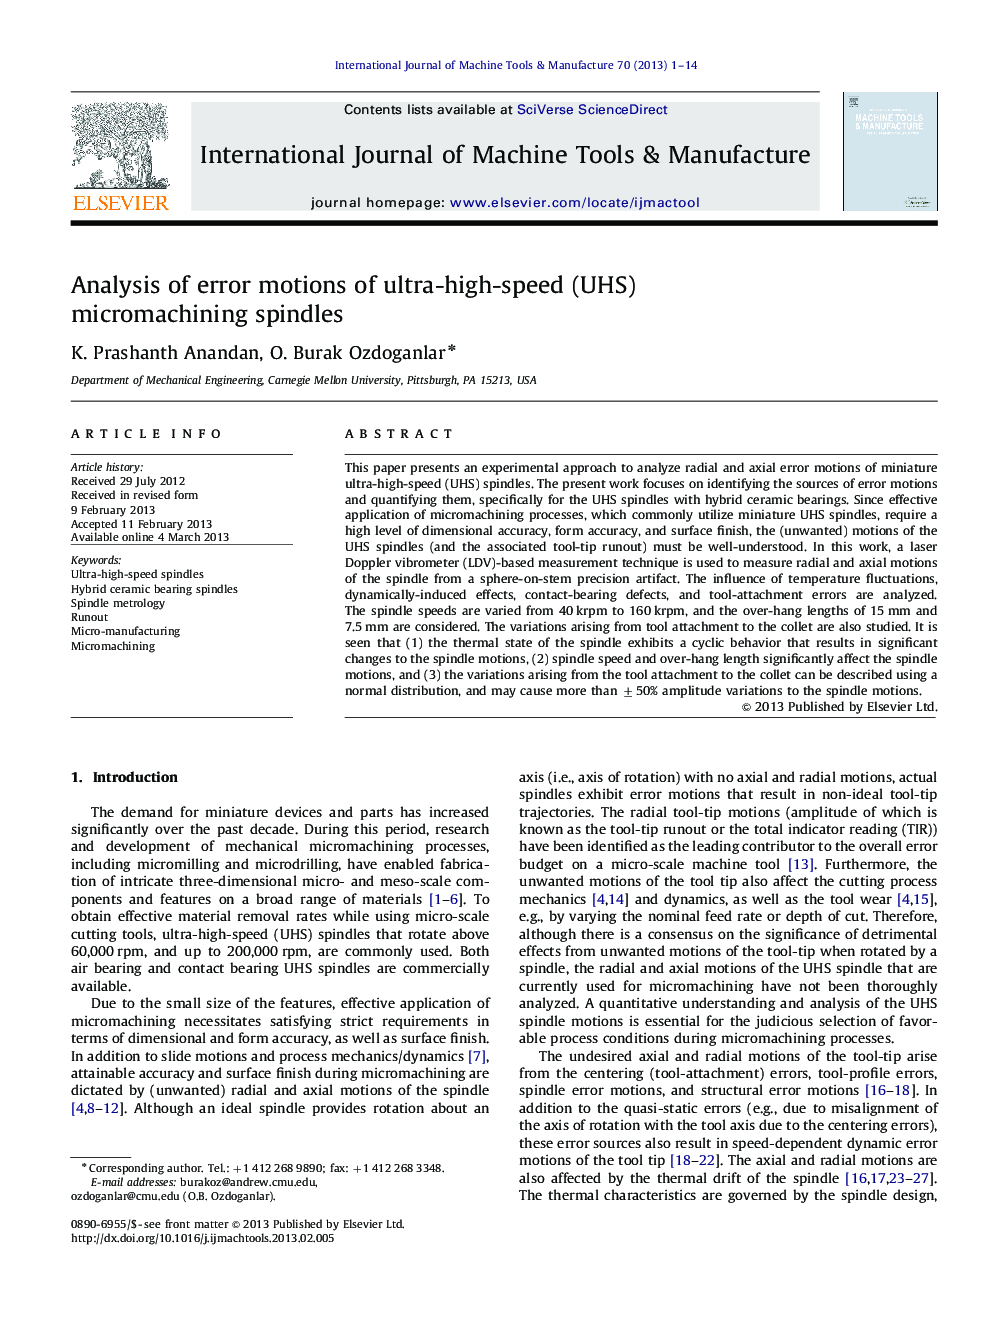 Analysis of error motions of ultra-high-speed (UHS) micromachining spindles